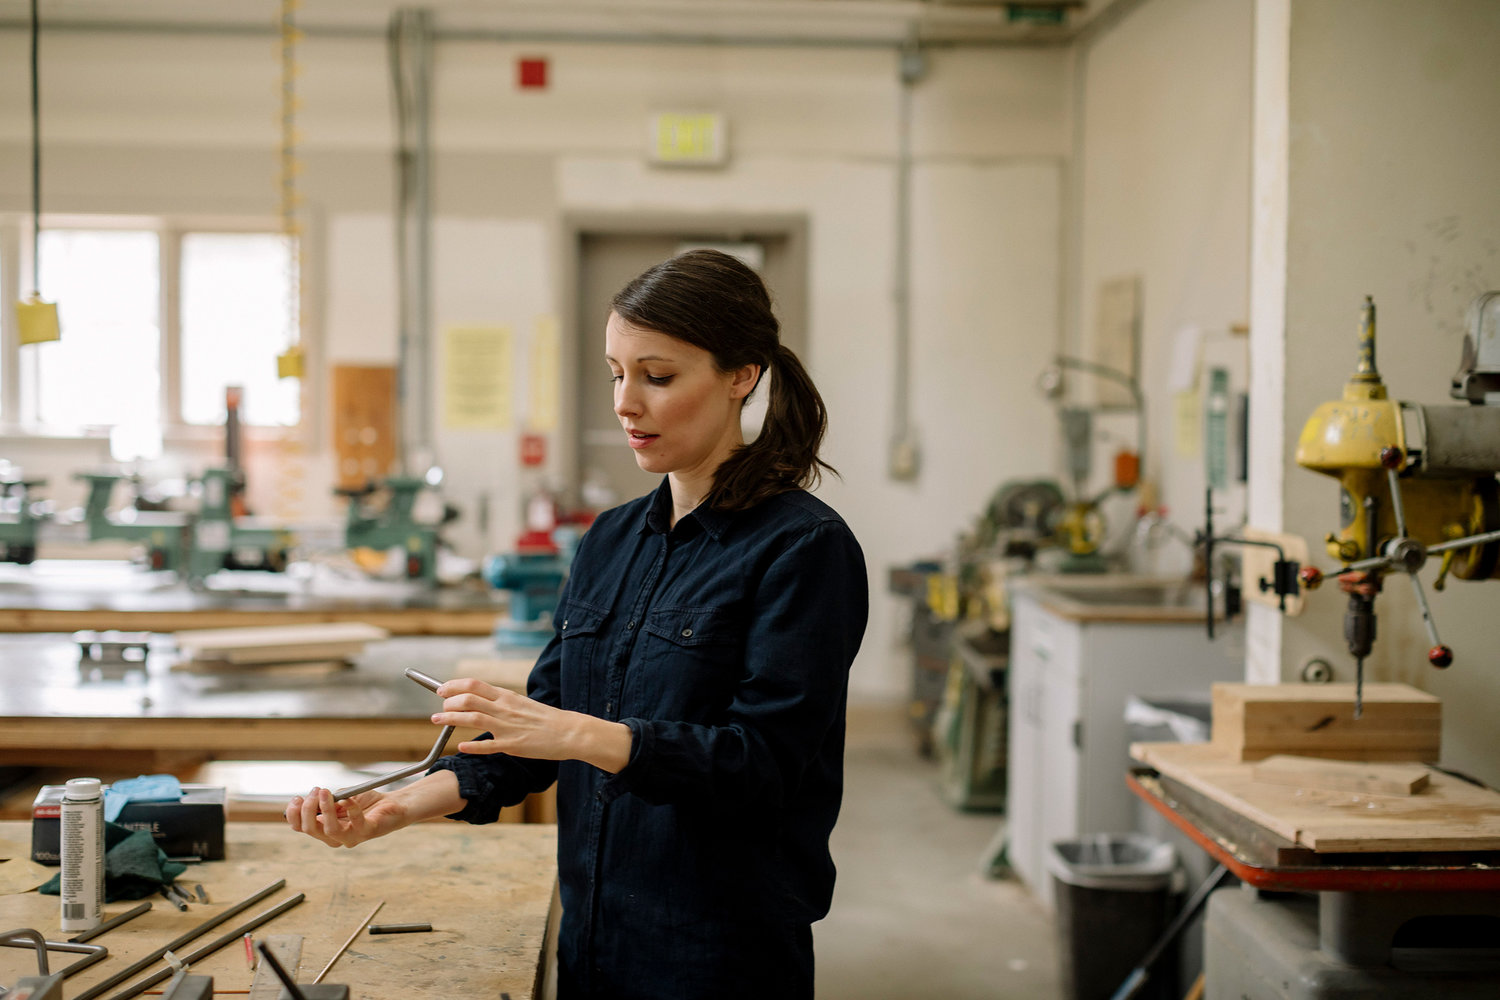 Good design is invisible: an interview with furniture designer Zoë Mowat